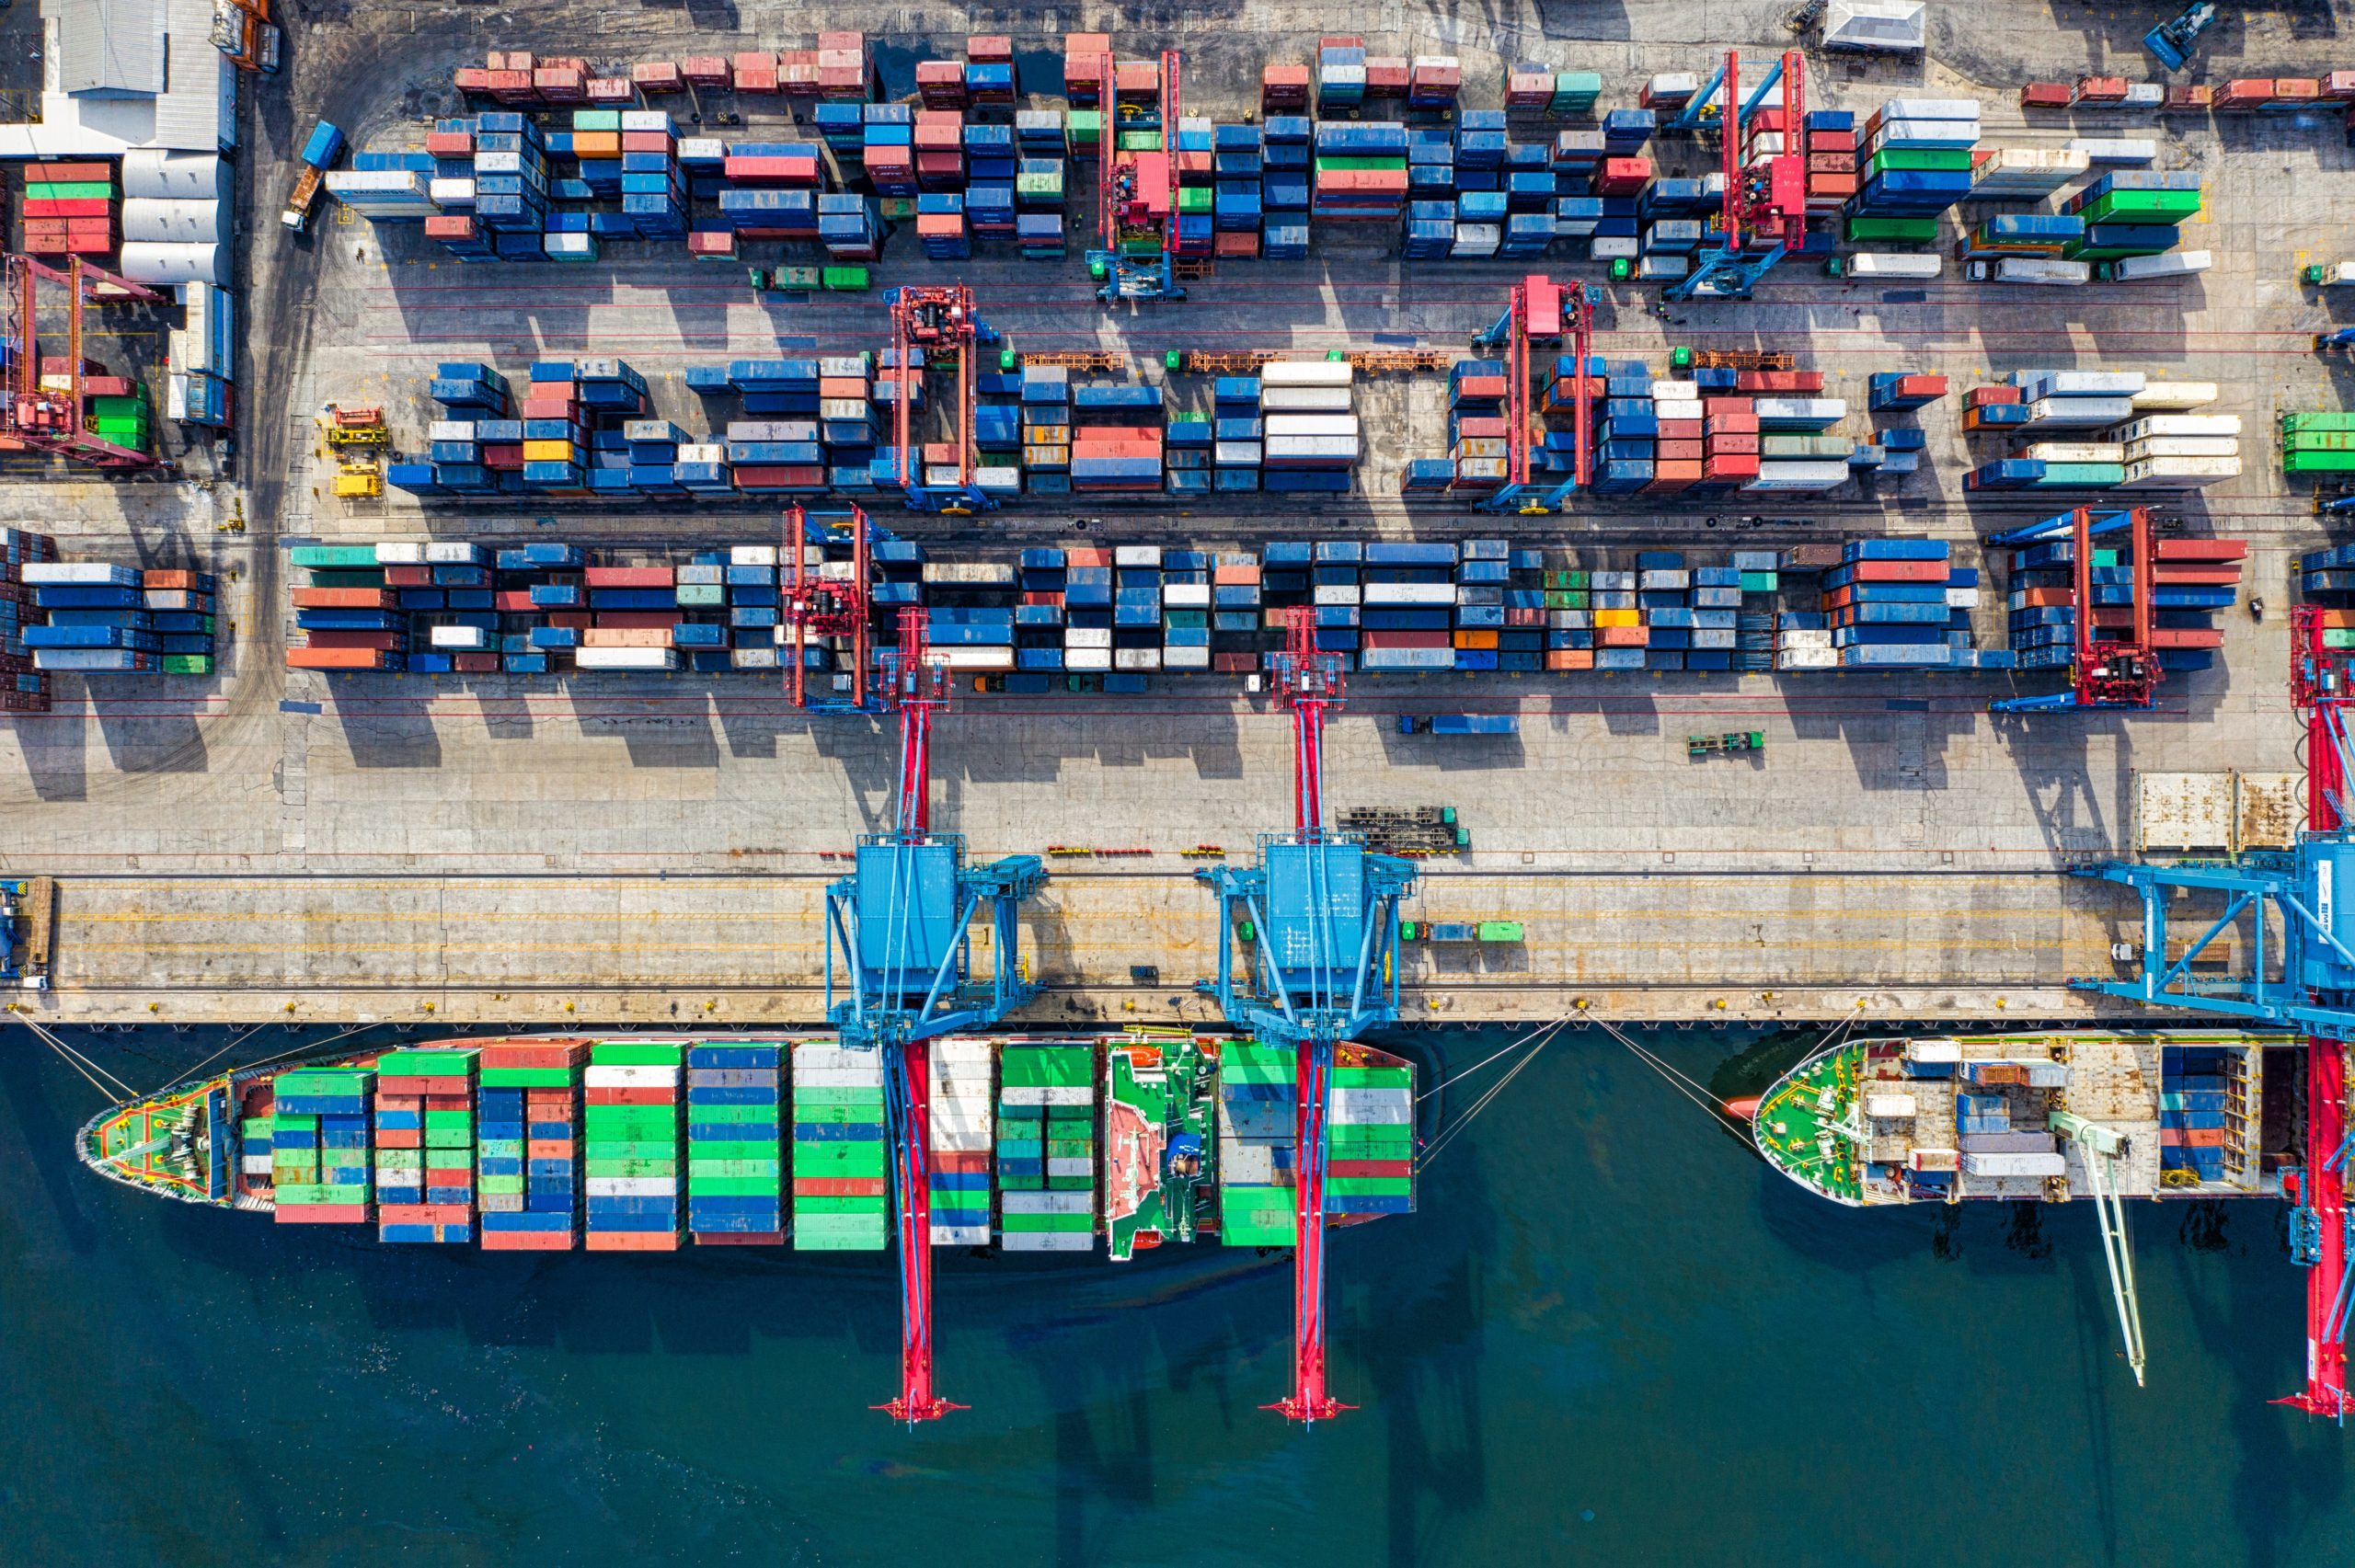 Cover photo of dock full of shipping containers and a cargo ship